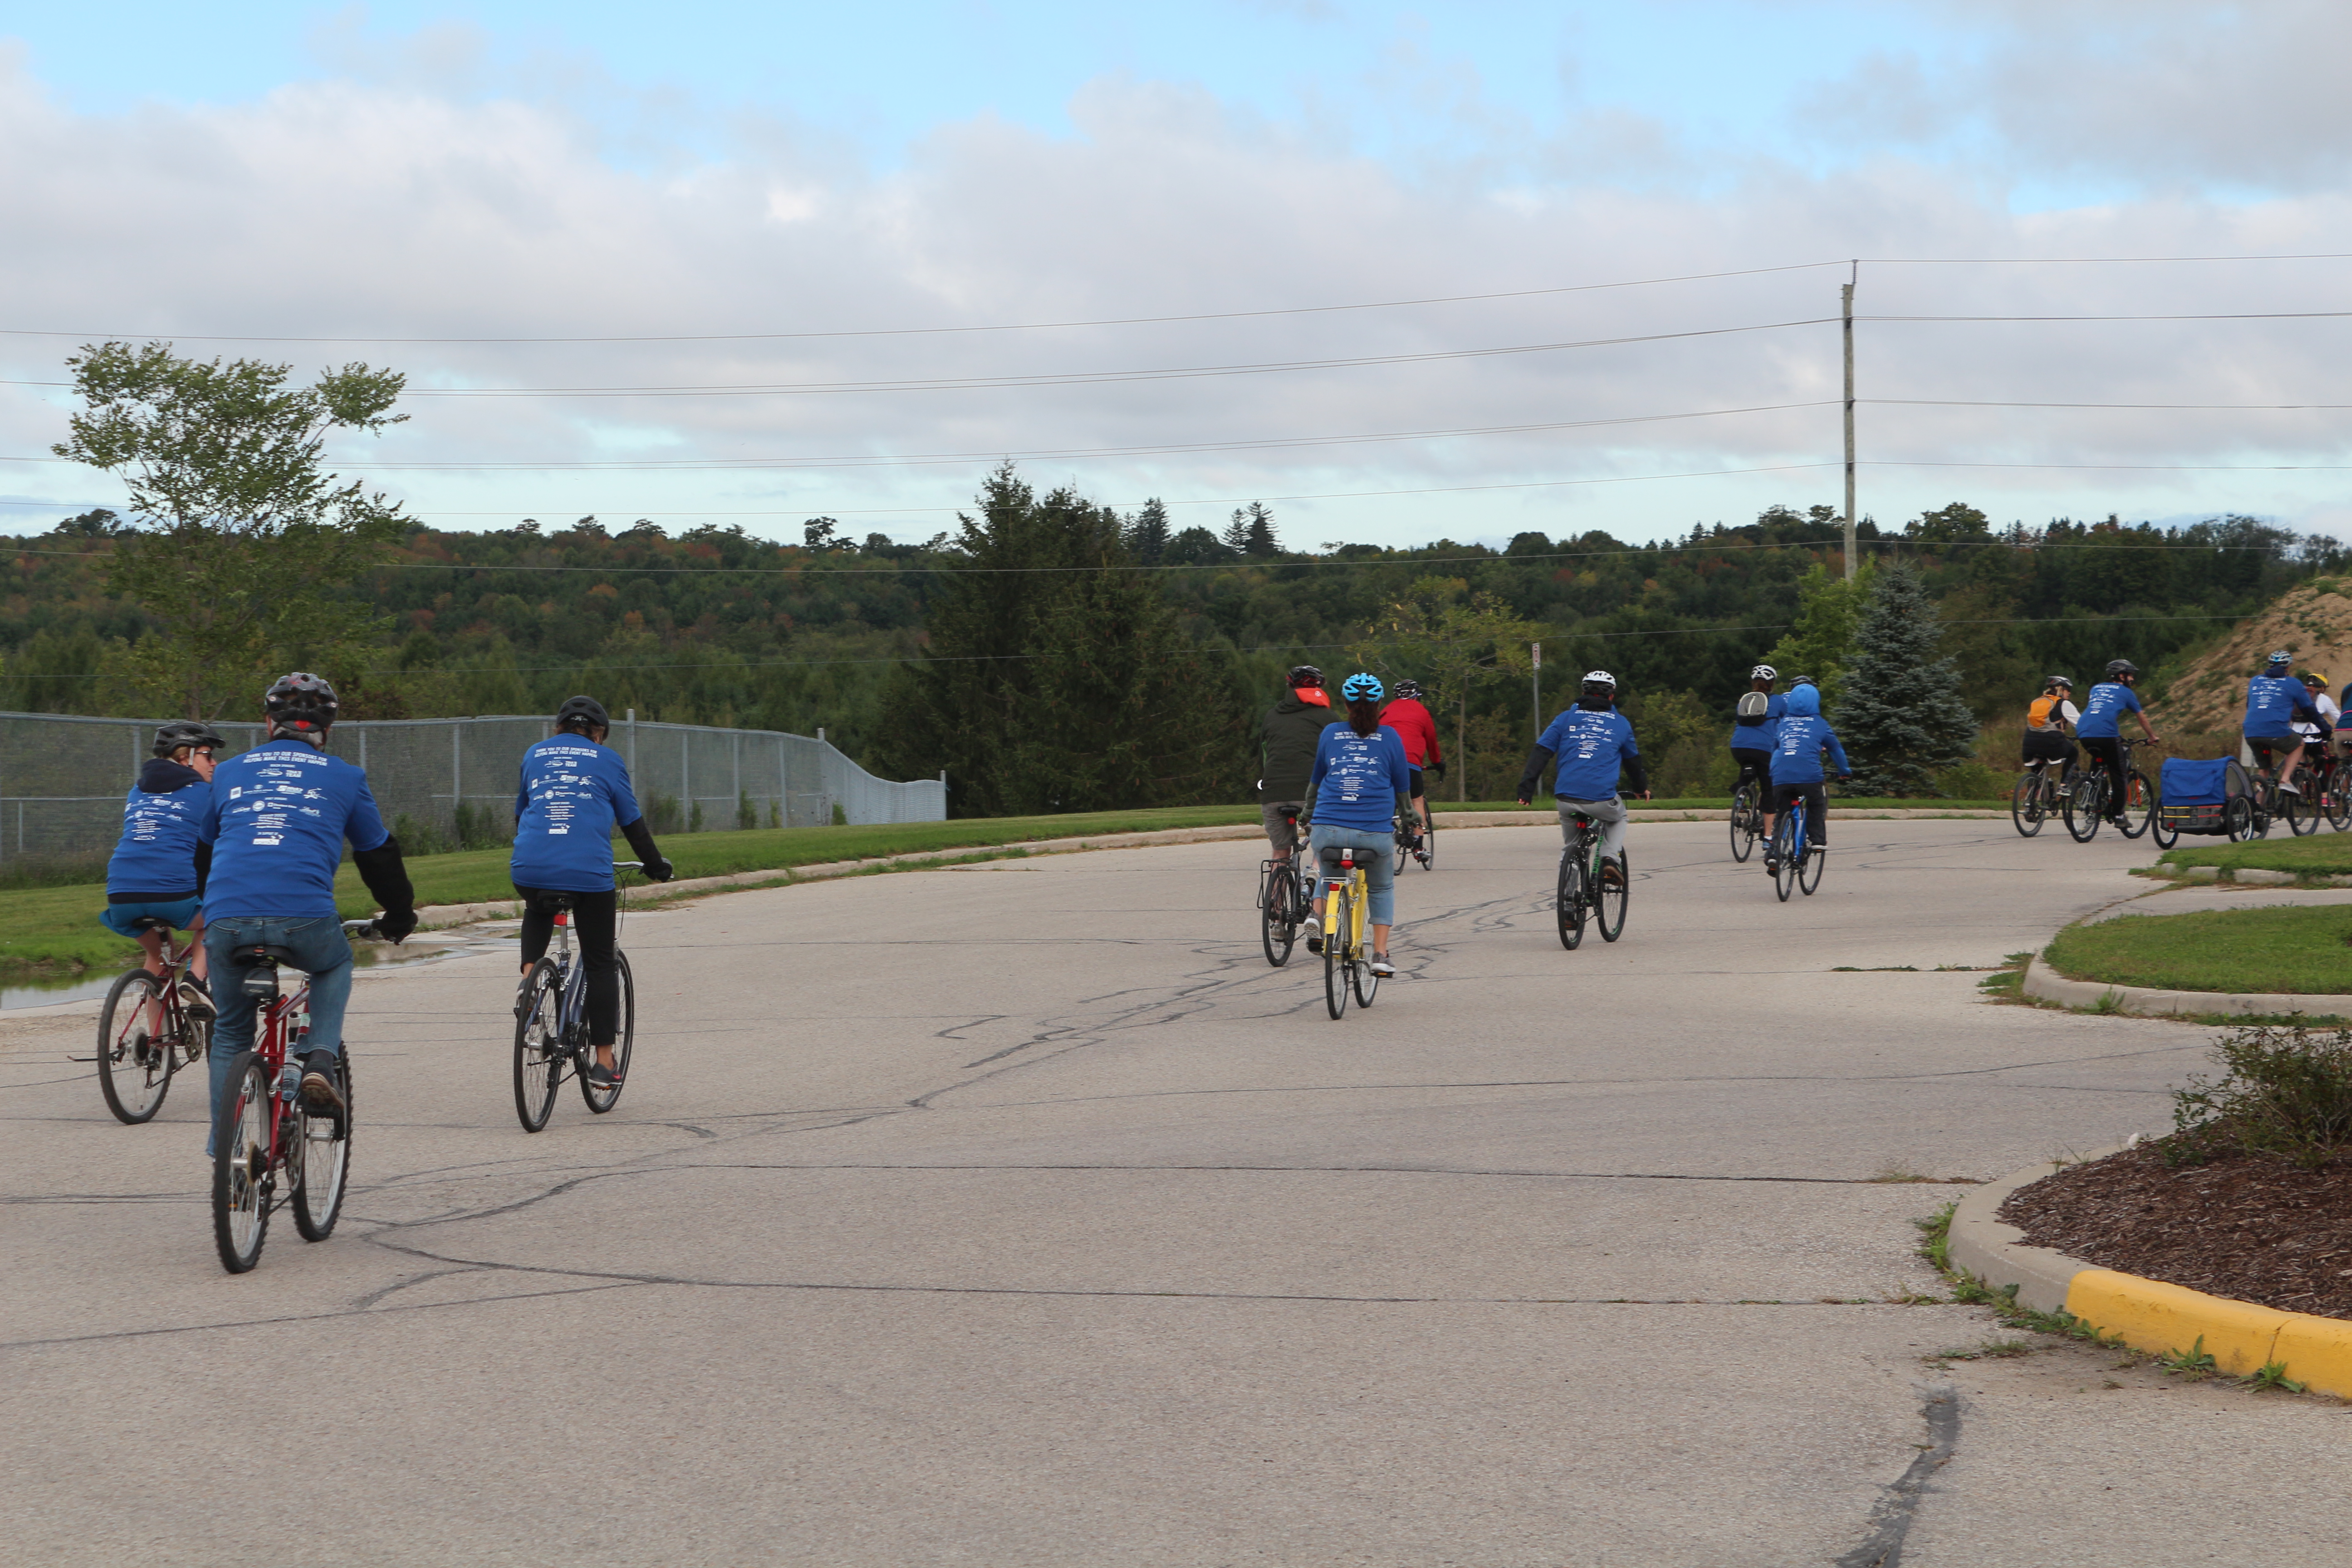 Pedal for Portage